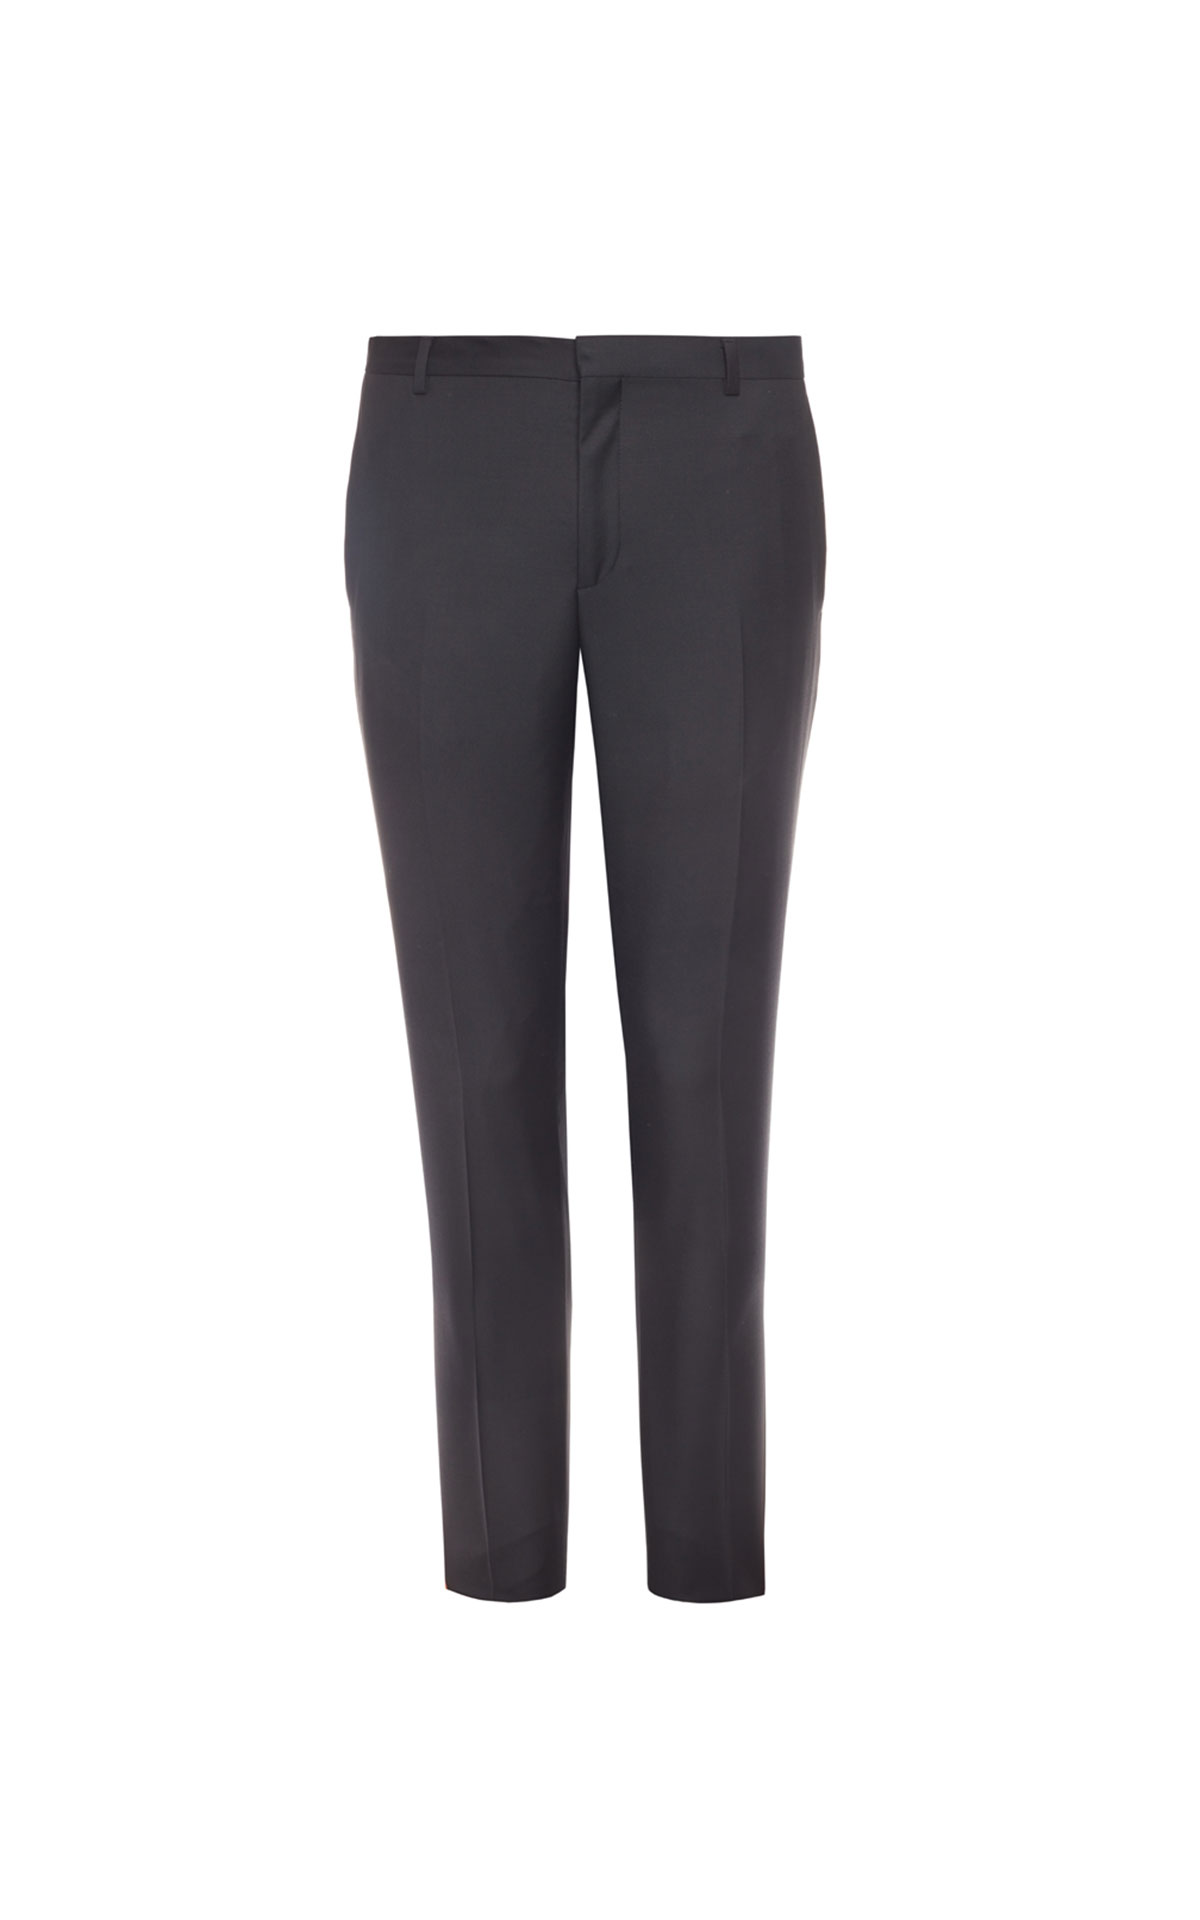 Paul Smith Slim mens trouser from Bicester Village